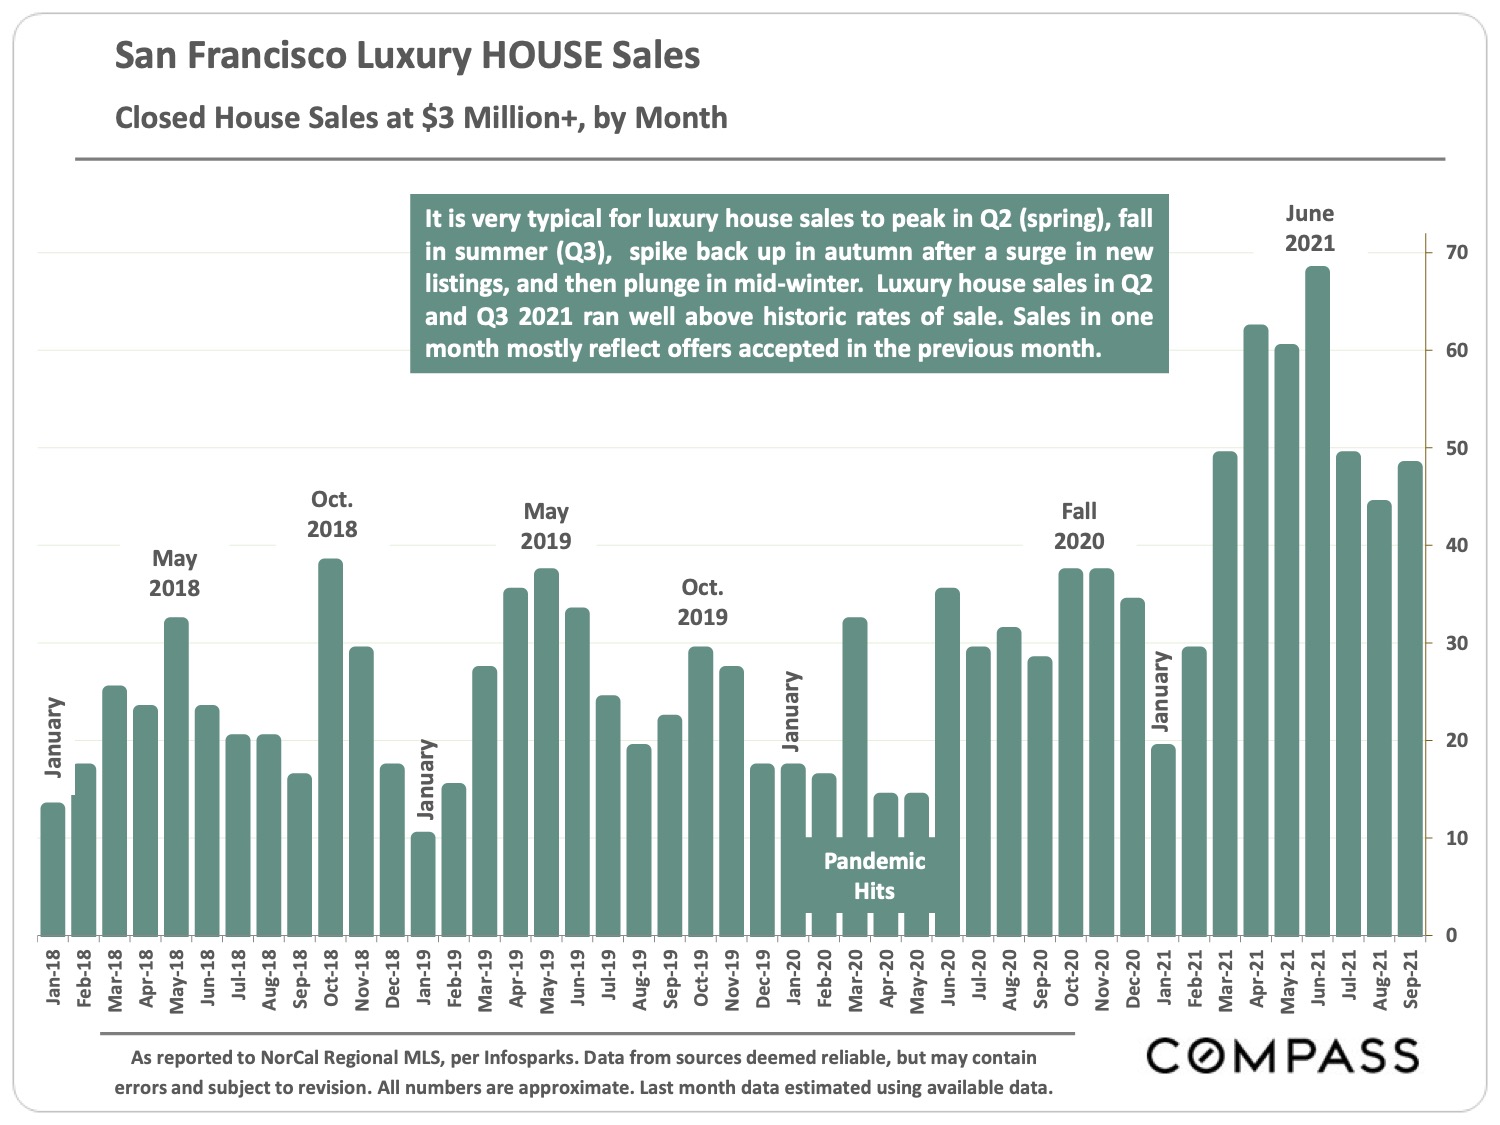 San Francisco Luxury House Sales - Closed House Sales at $3 Million+, by Month